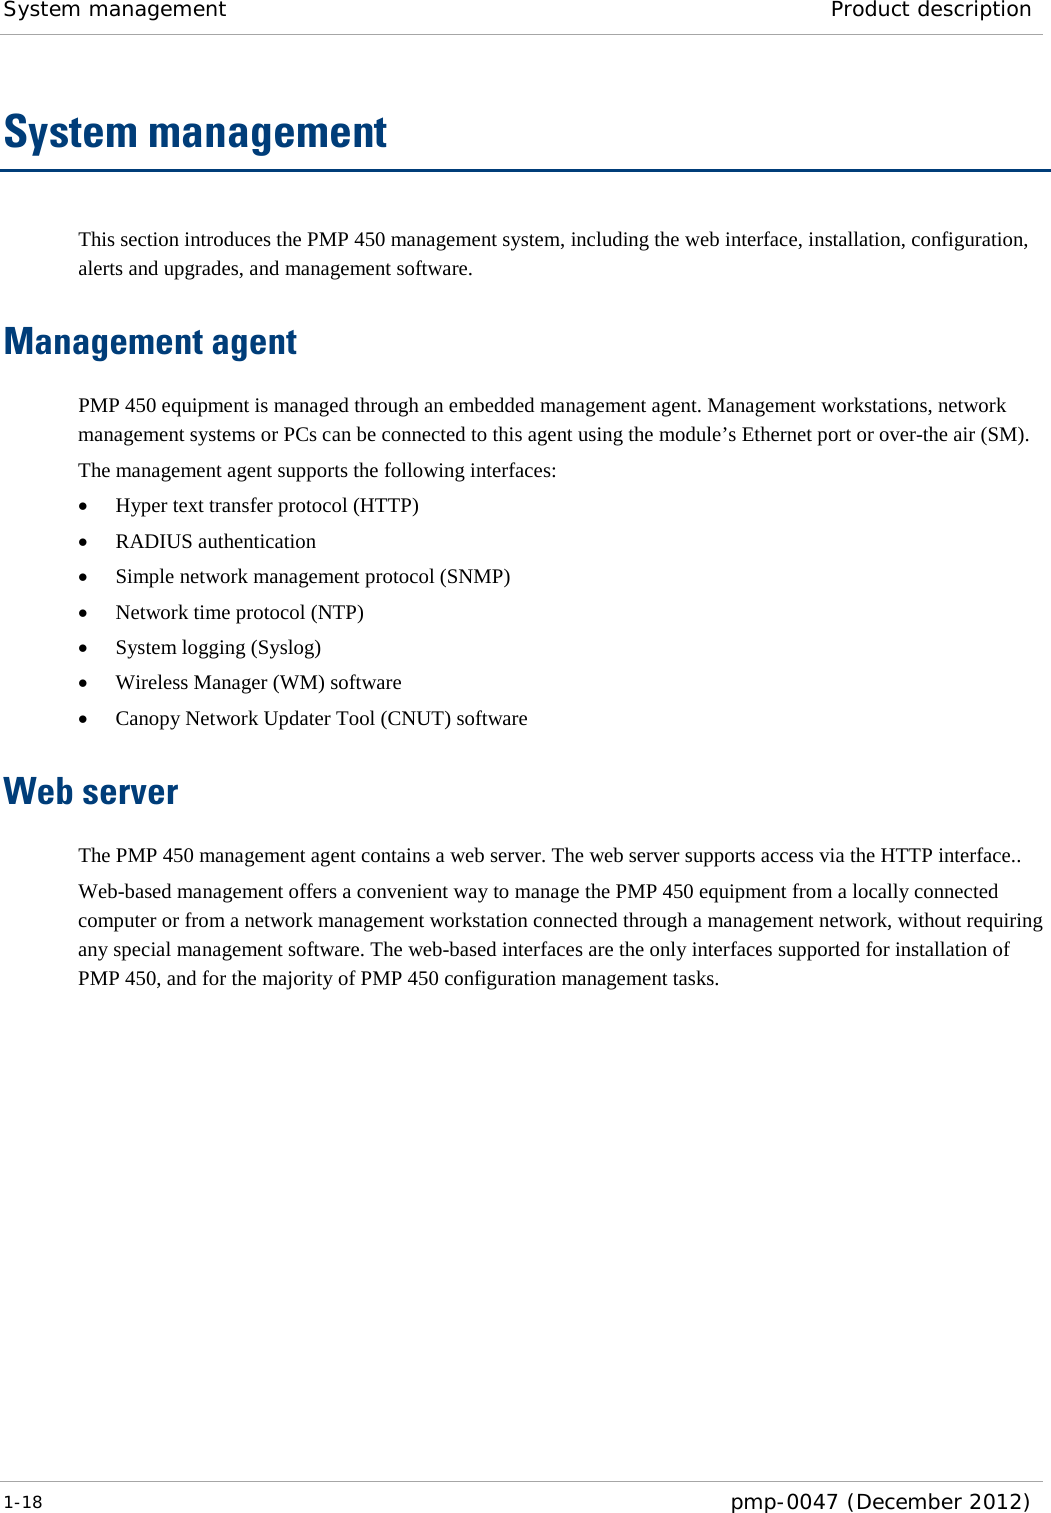 System management Product description  1-18  pmp-0047 (December 2012)  System management This section introduces the PMP 450 management system, including the web interface, installation, configuration, alerts and upgrades, and management software. Management agent PMP 450 equipment is managed through an embedded management agent. Management workstations, network management systems or PCs can be connected to this agent using the module’s Ethernet port or over-the air (SM). The management agent supports the following interfaces: • Hyper text transfer protocol (HTTP) • RADIUS authentication • Simple network management protocol (SNMP) • Network time protocol (NTP) • System logging (Syslog) • Wireless Manager (WM) software • Canopy Network Updater Tool (CNUT) software Web server The PMP 450 management agent contains a web server. The web server supports access via the HTTP interface.. Web-based management offers a convenient way to manage the PMP 450 equipment from a locally connected computer or from a network management workstation connected through a management network, without requiring any special management software. The web-based interfaces are the only interfaces supported for installation of PMP 450, and for the majority of PMP 450 configuration management tasks. 